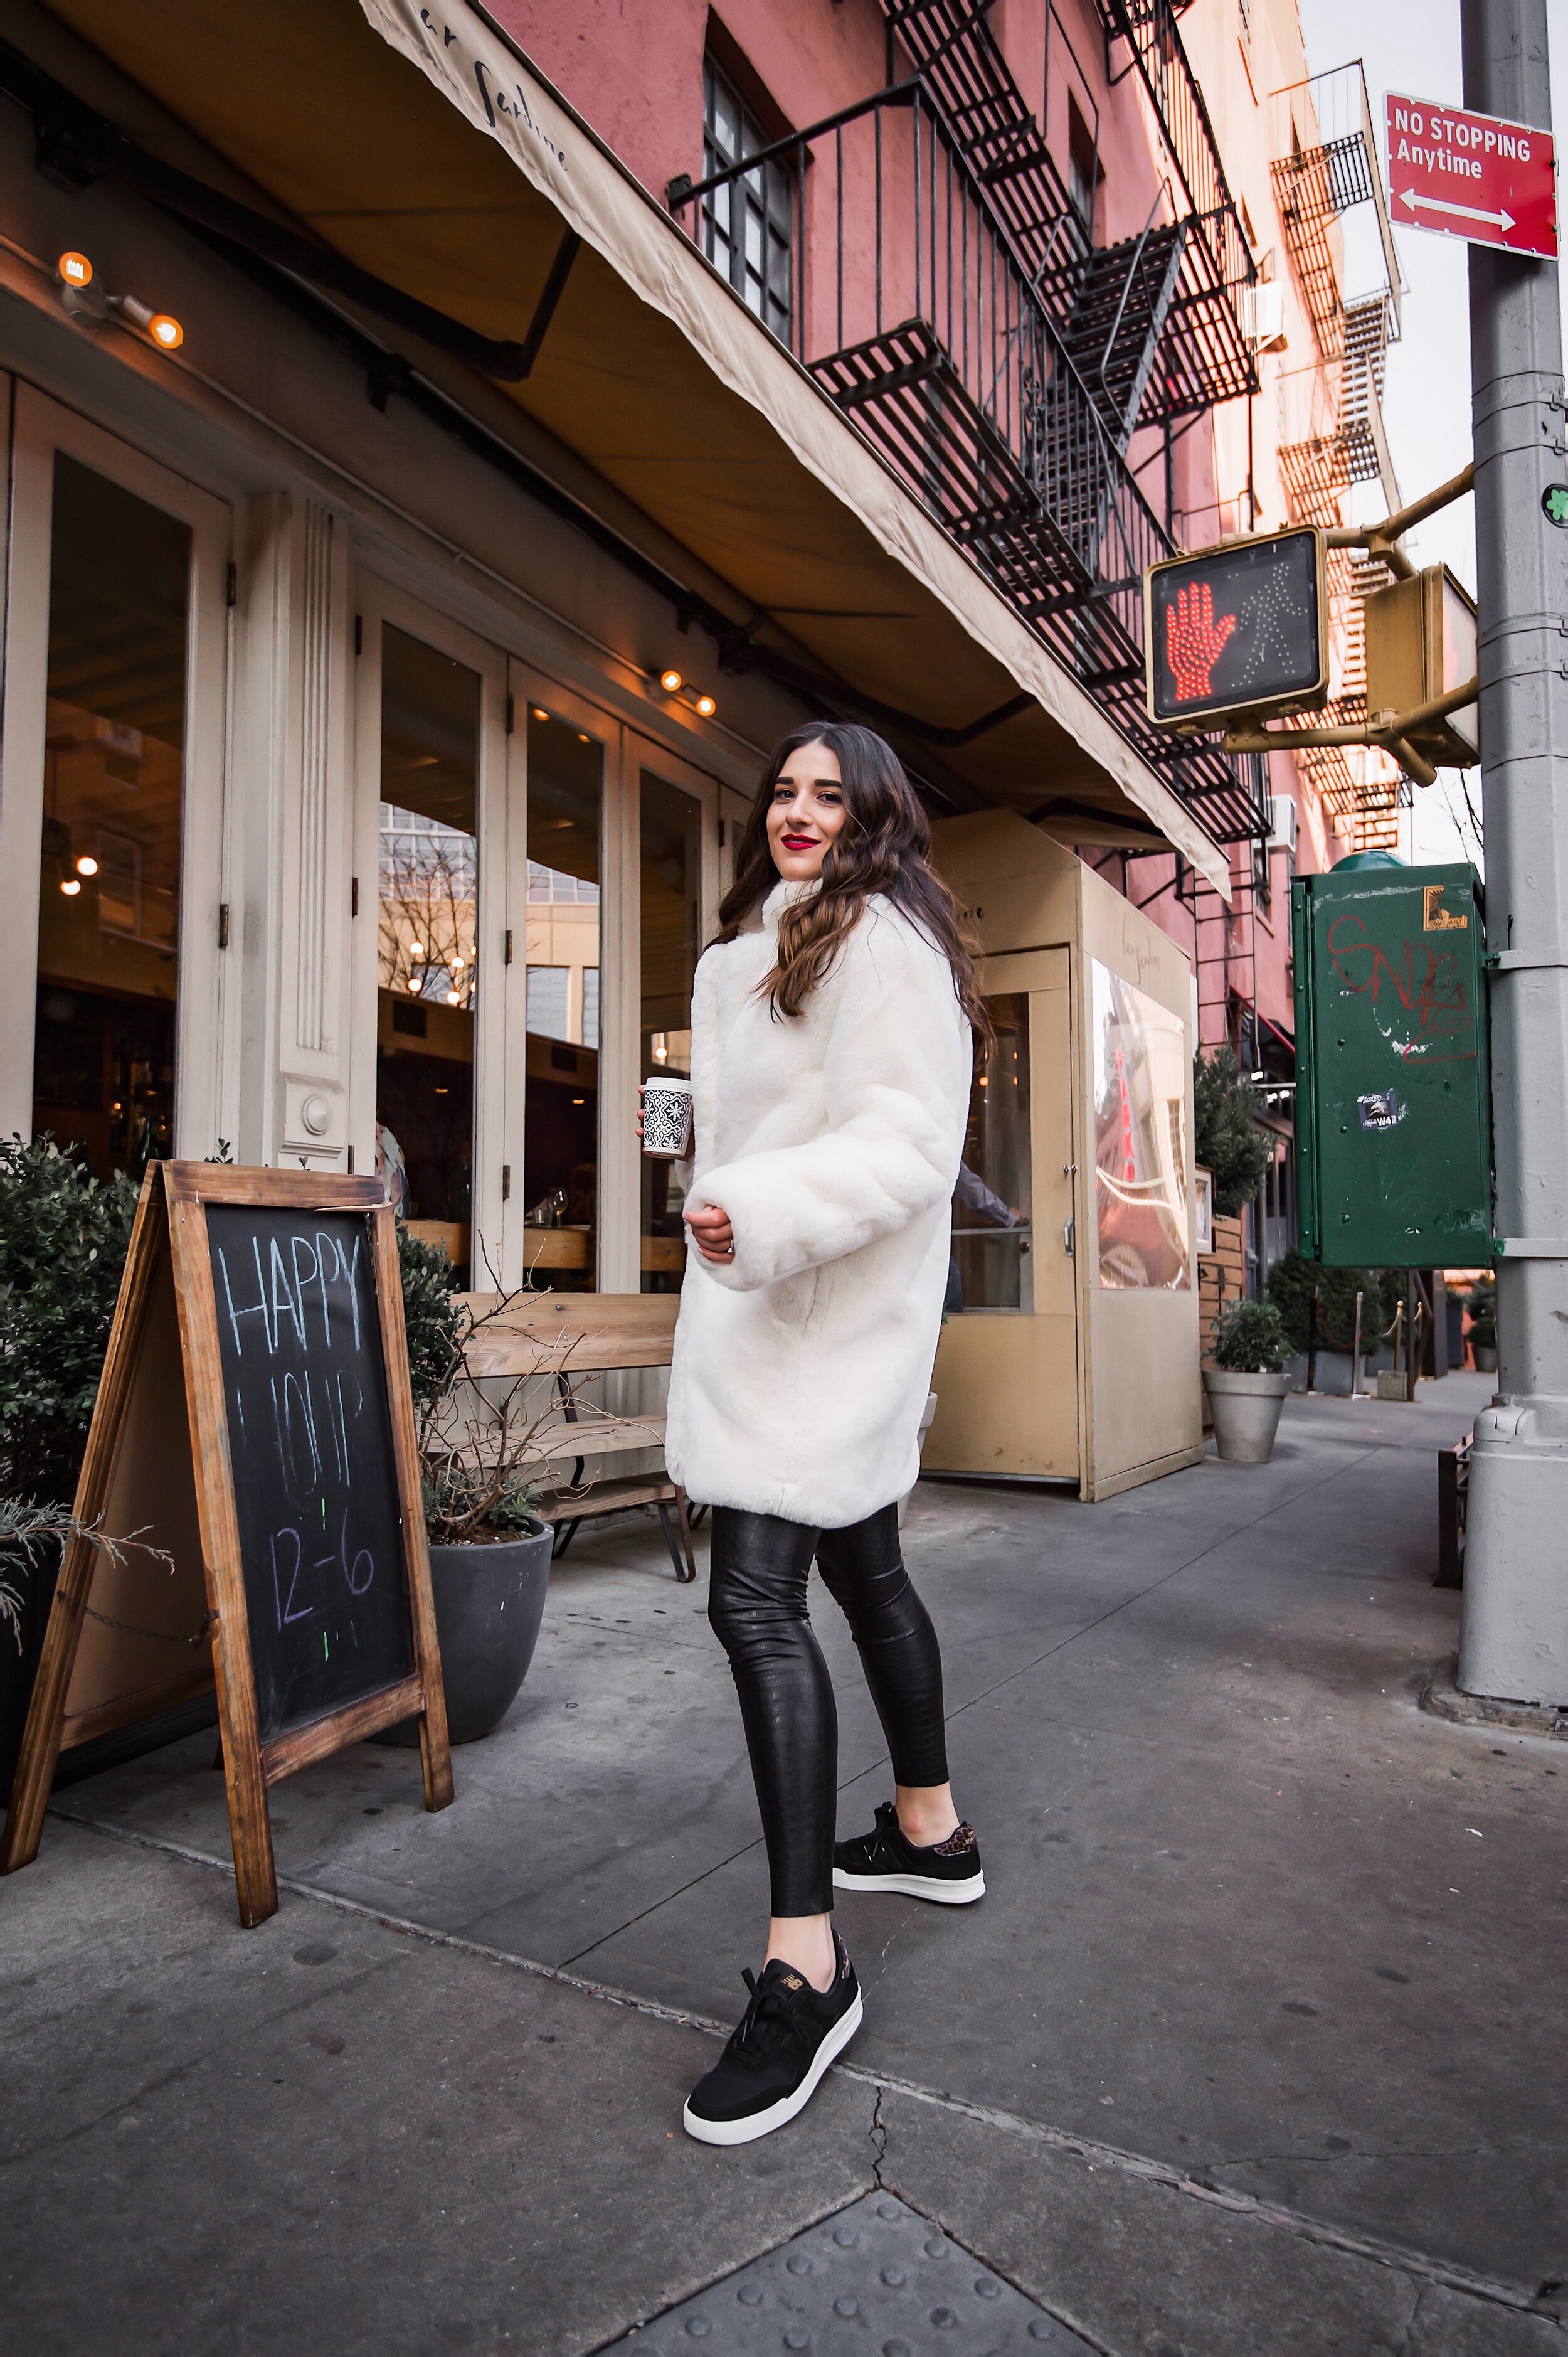 White Fur Coat Black Snakeskin Leggings Esther Santer NYC Street Style Fashion Blog Winter Outfit OOTD Faux Fur Commando Nordstrom Maman Coffee Happy Girl Women Shopping Buy Red Lipstick Taxi Photography Manhattan Comfortable West  Village Location.JPG